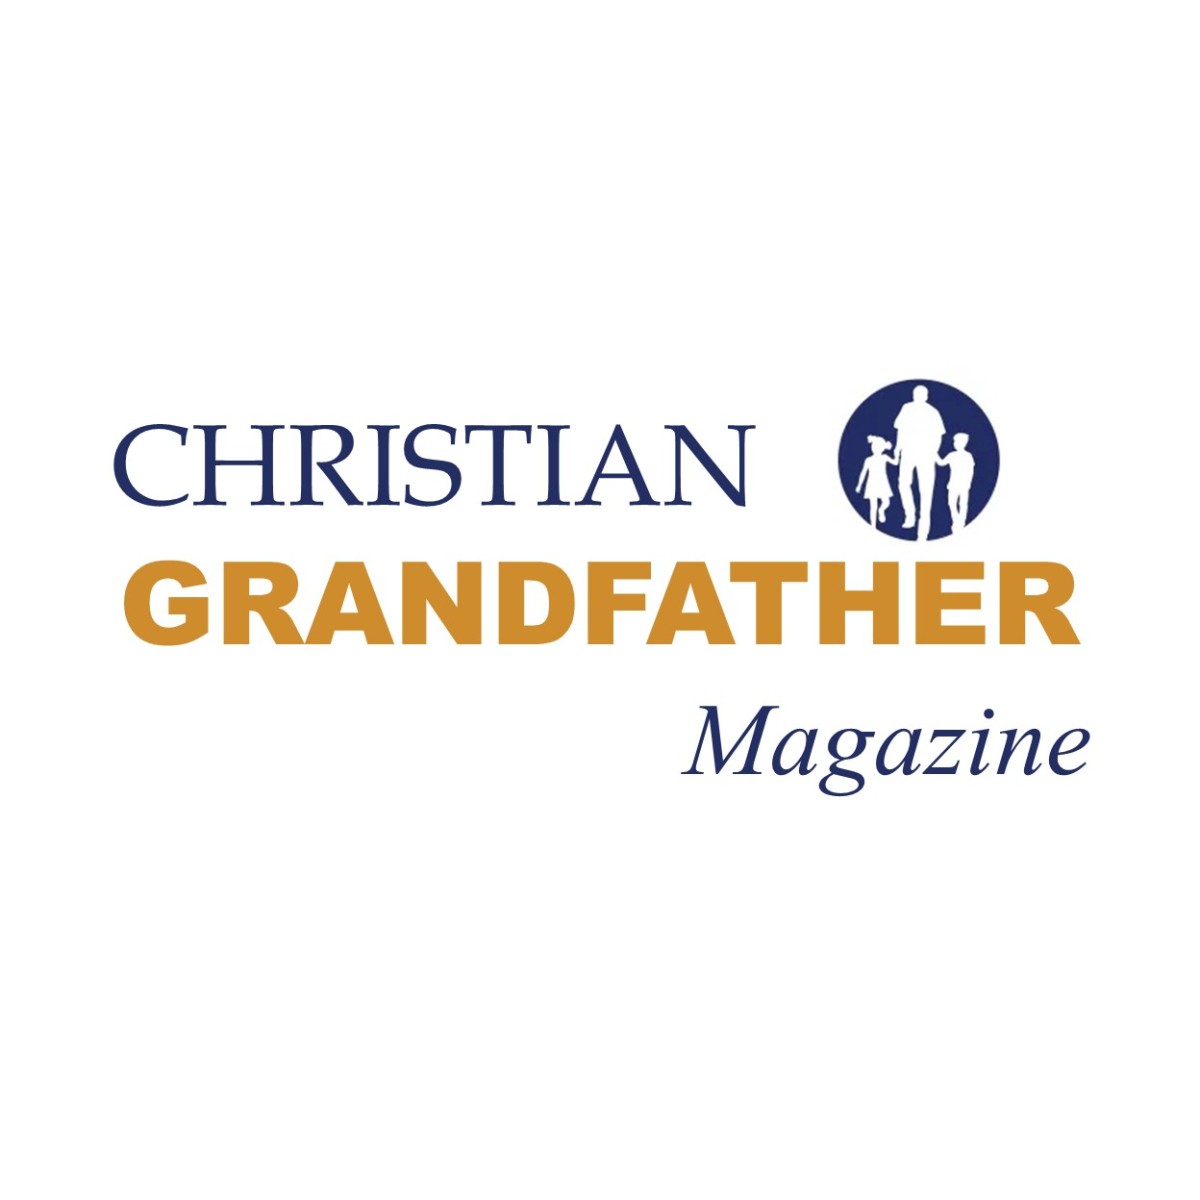 What’s Up, Christian Grandfather Magazine!